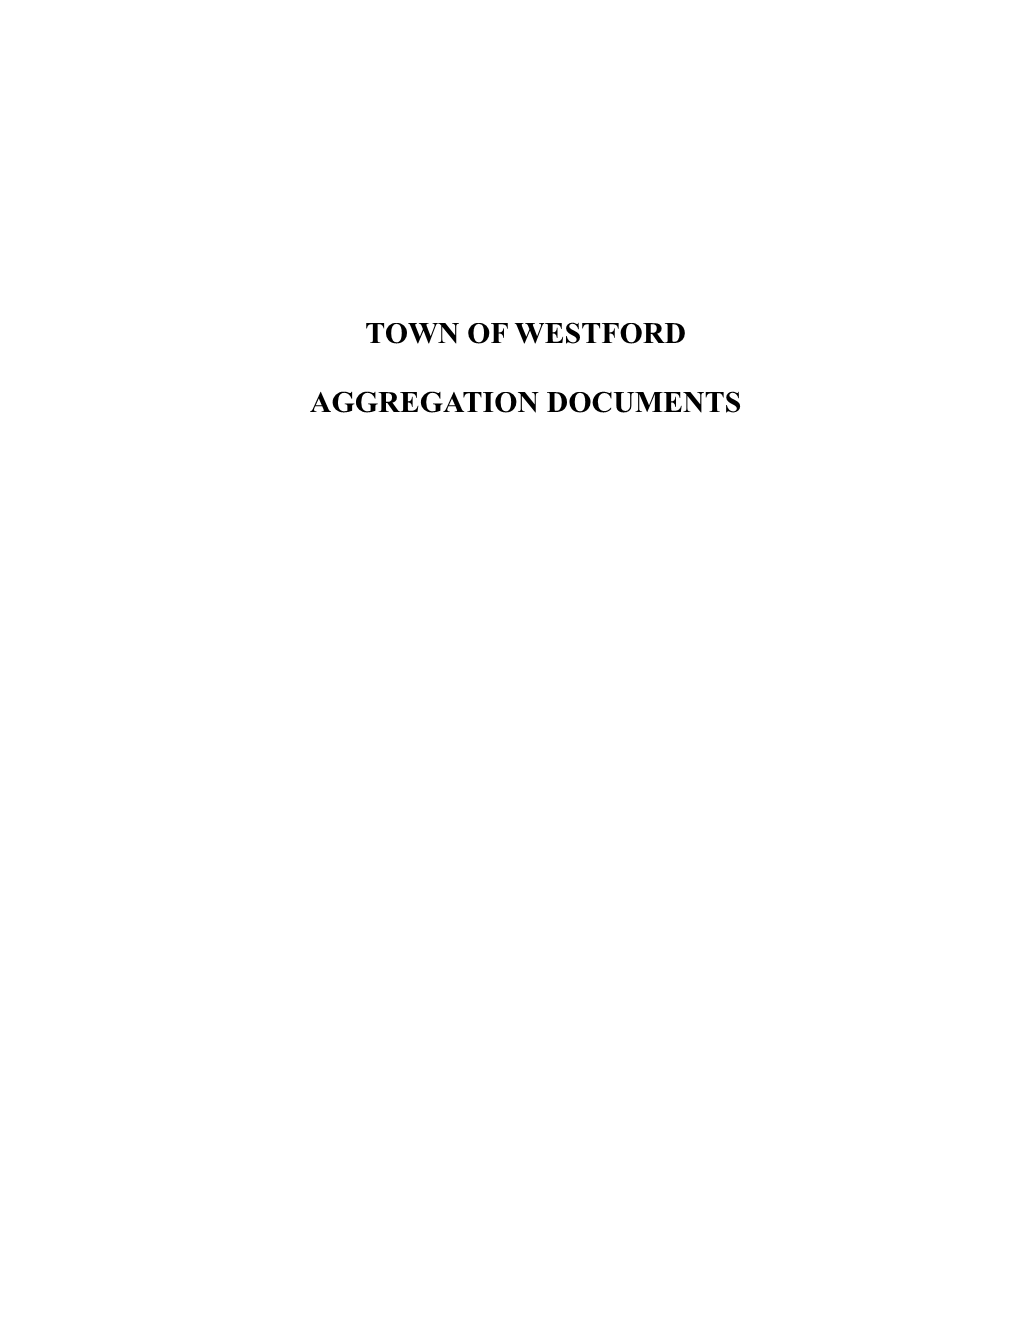 Town of Westford Aggregation